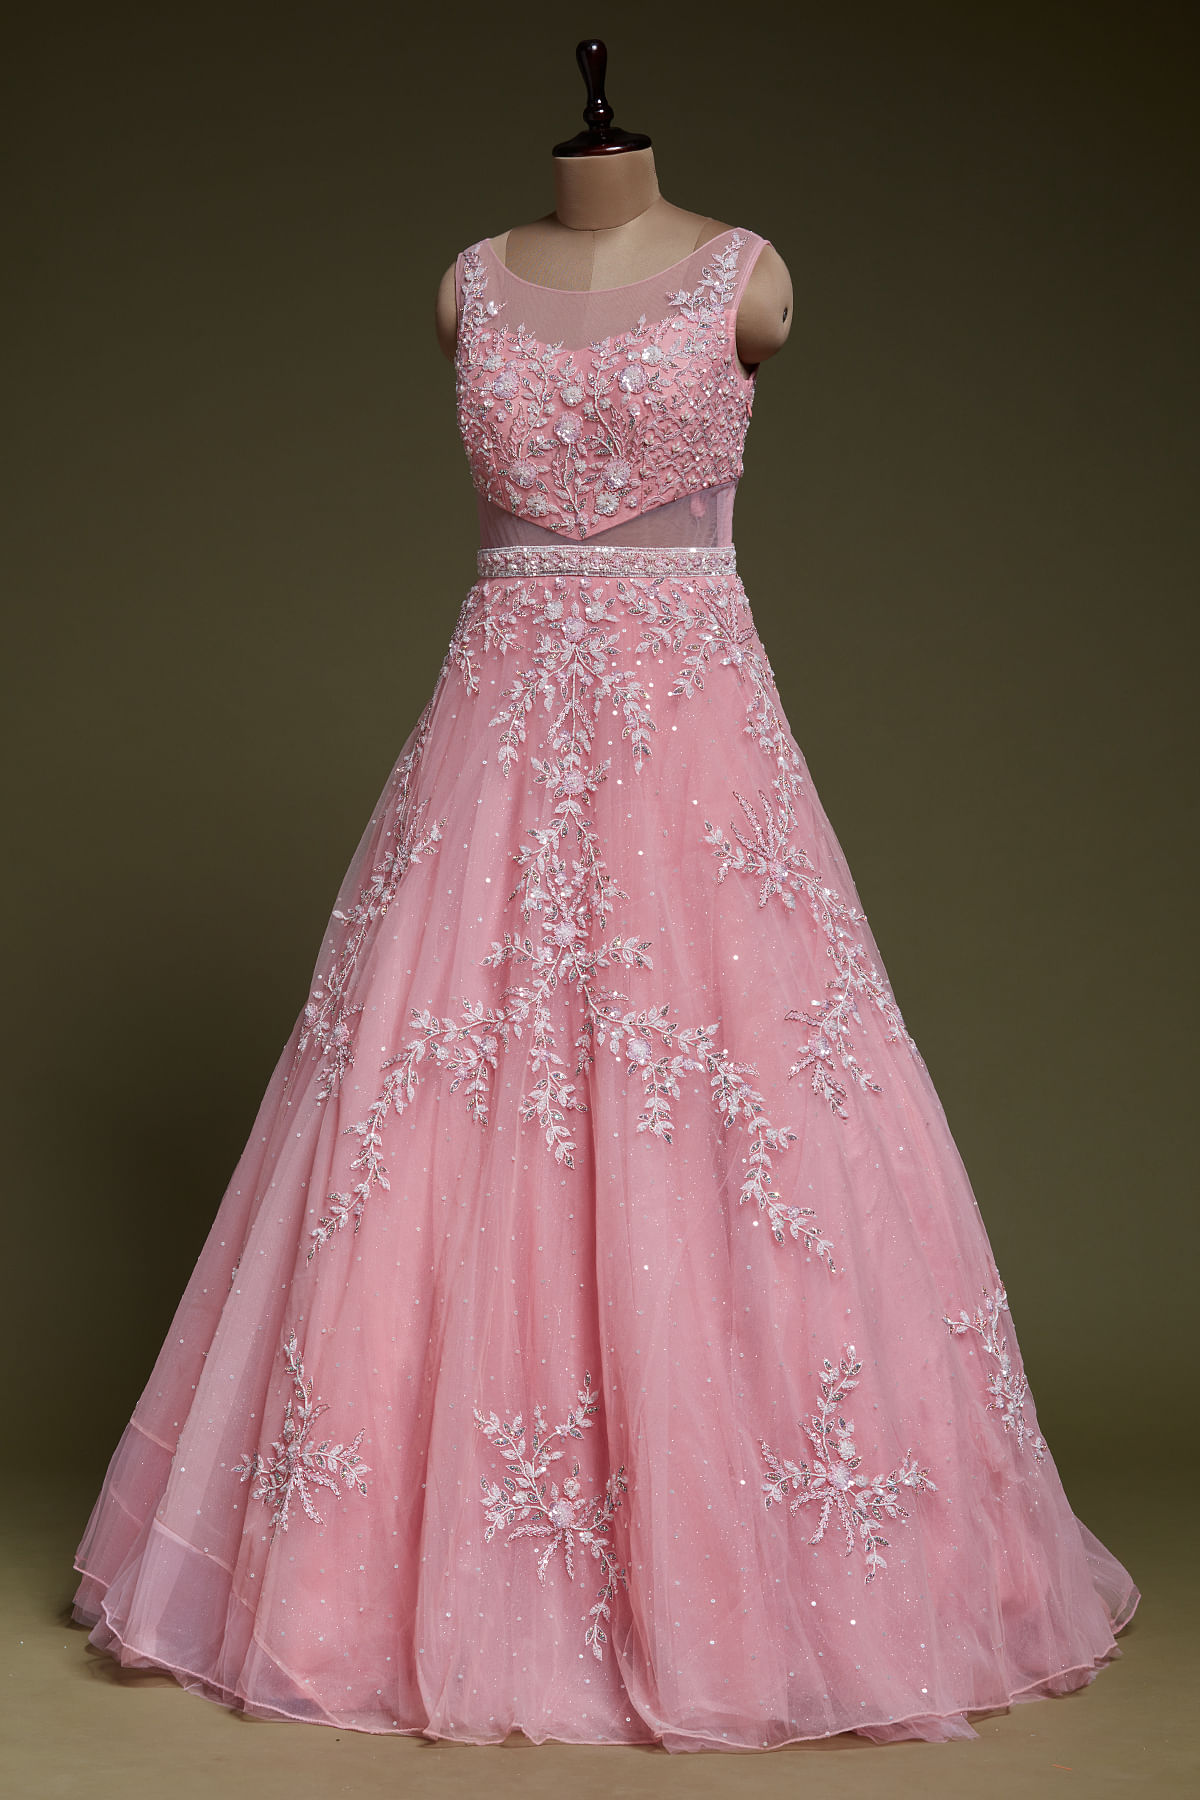 Light Pink Gown | Pageant evening gowns, Pageant gowns, Formal dresses long